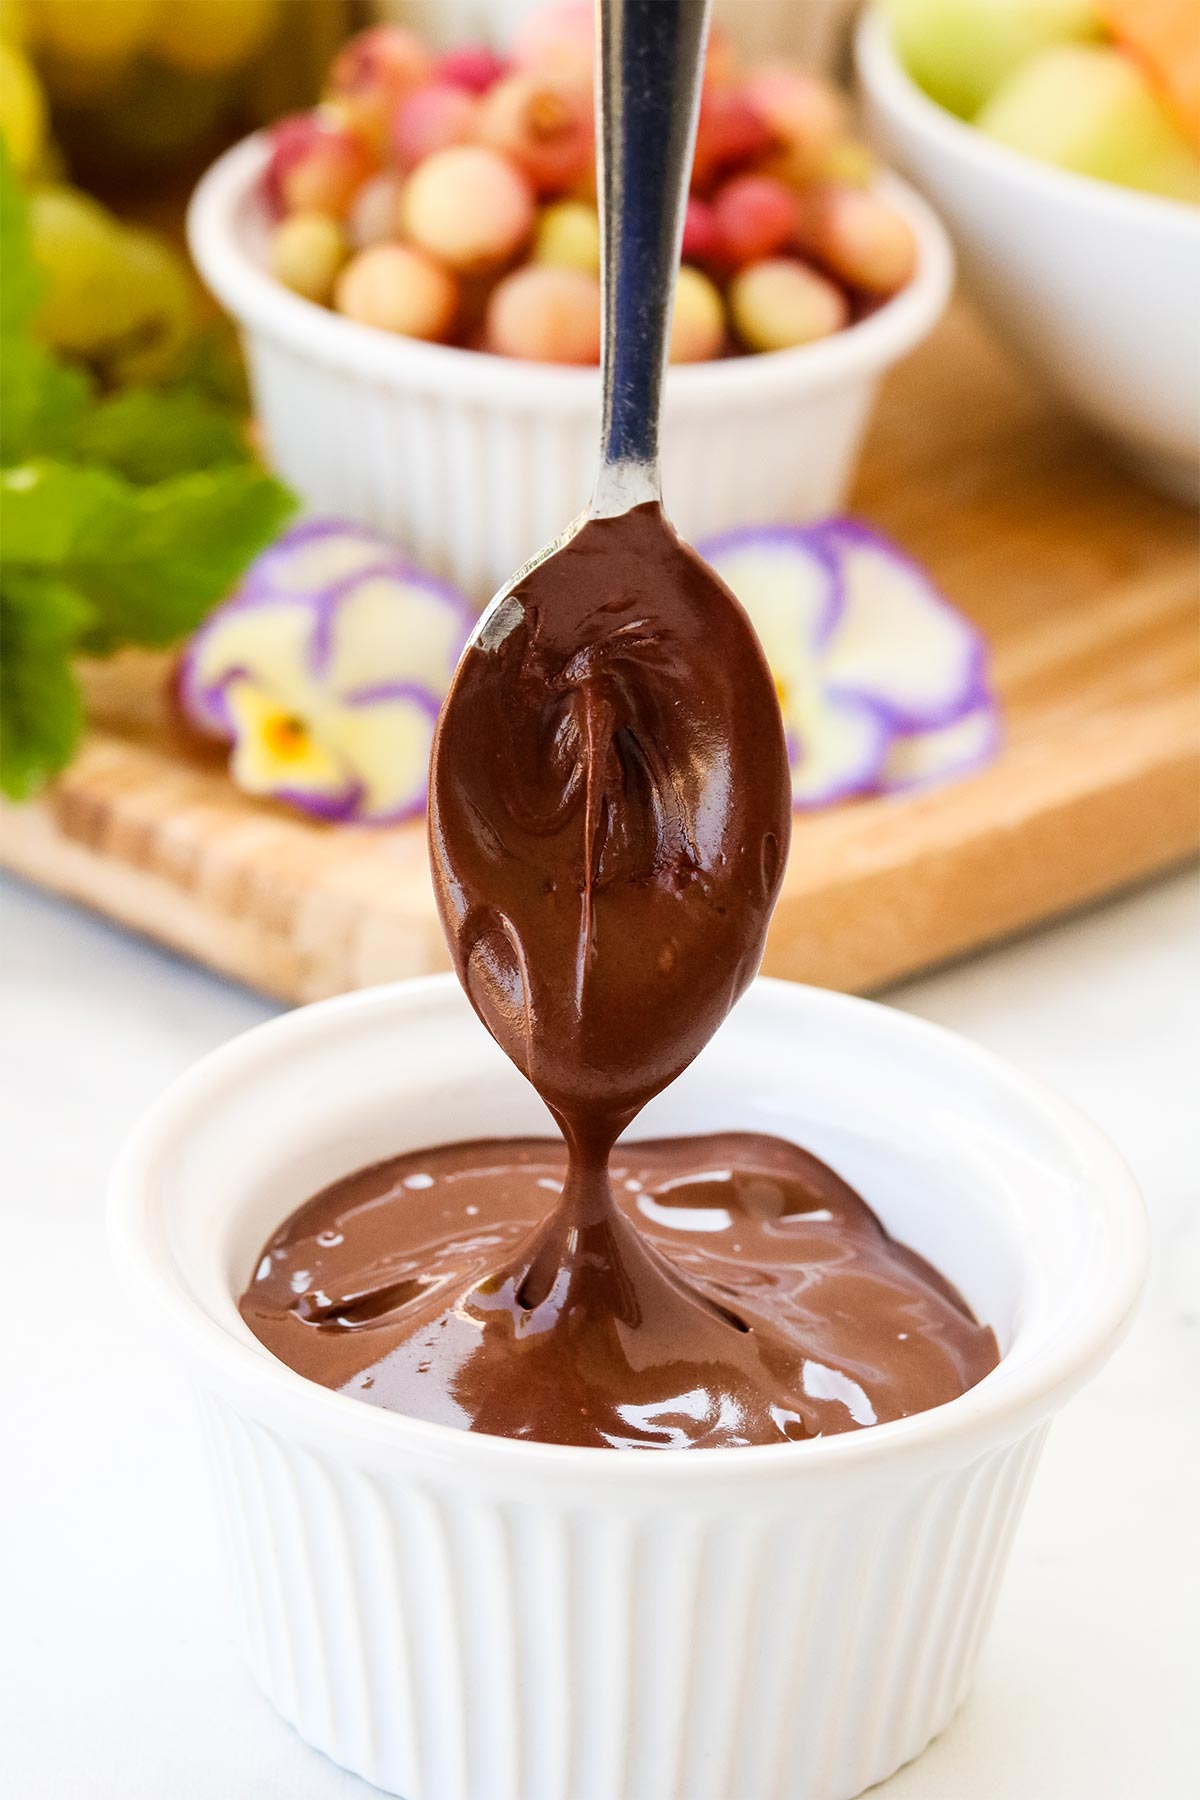 Spoon dipping into melted chocolate.